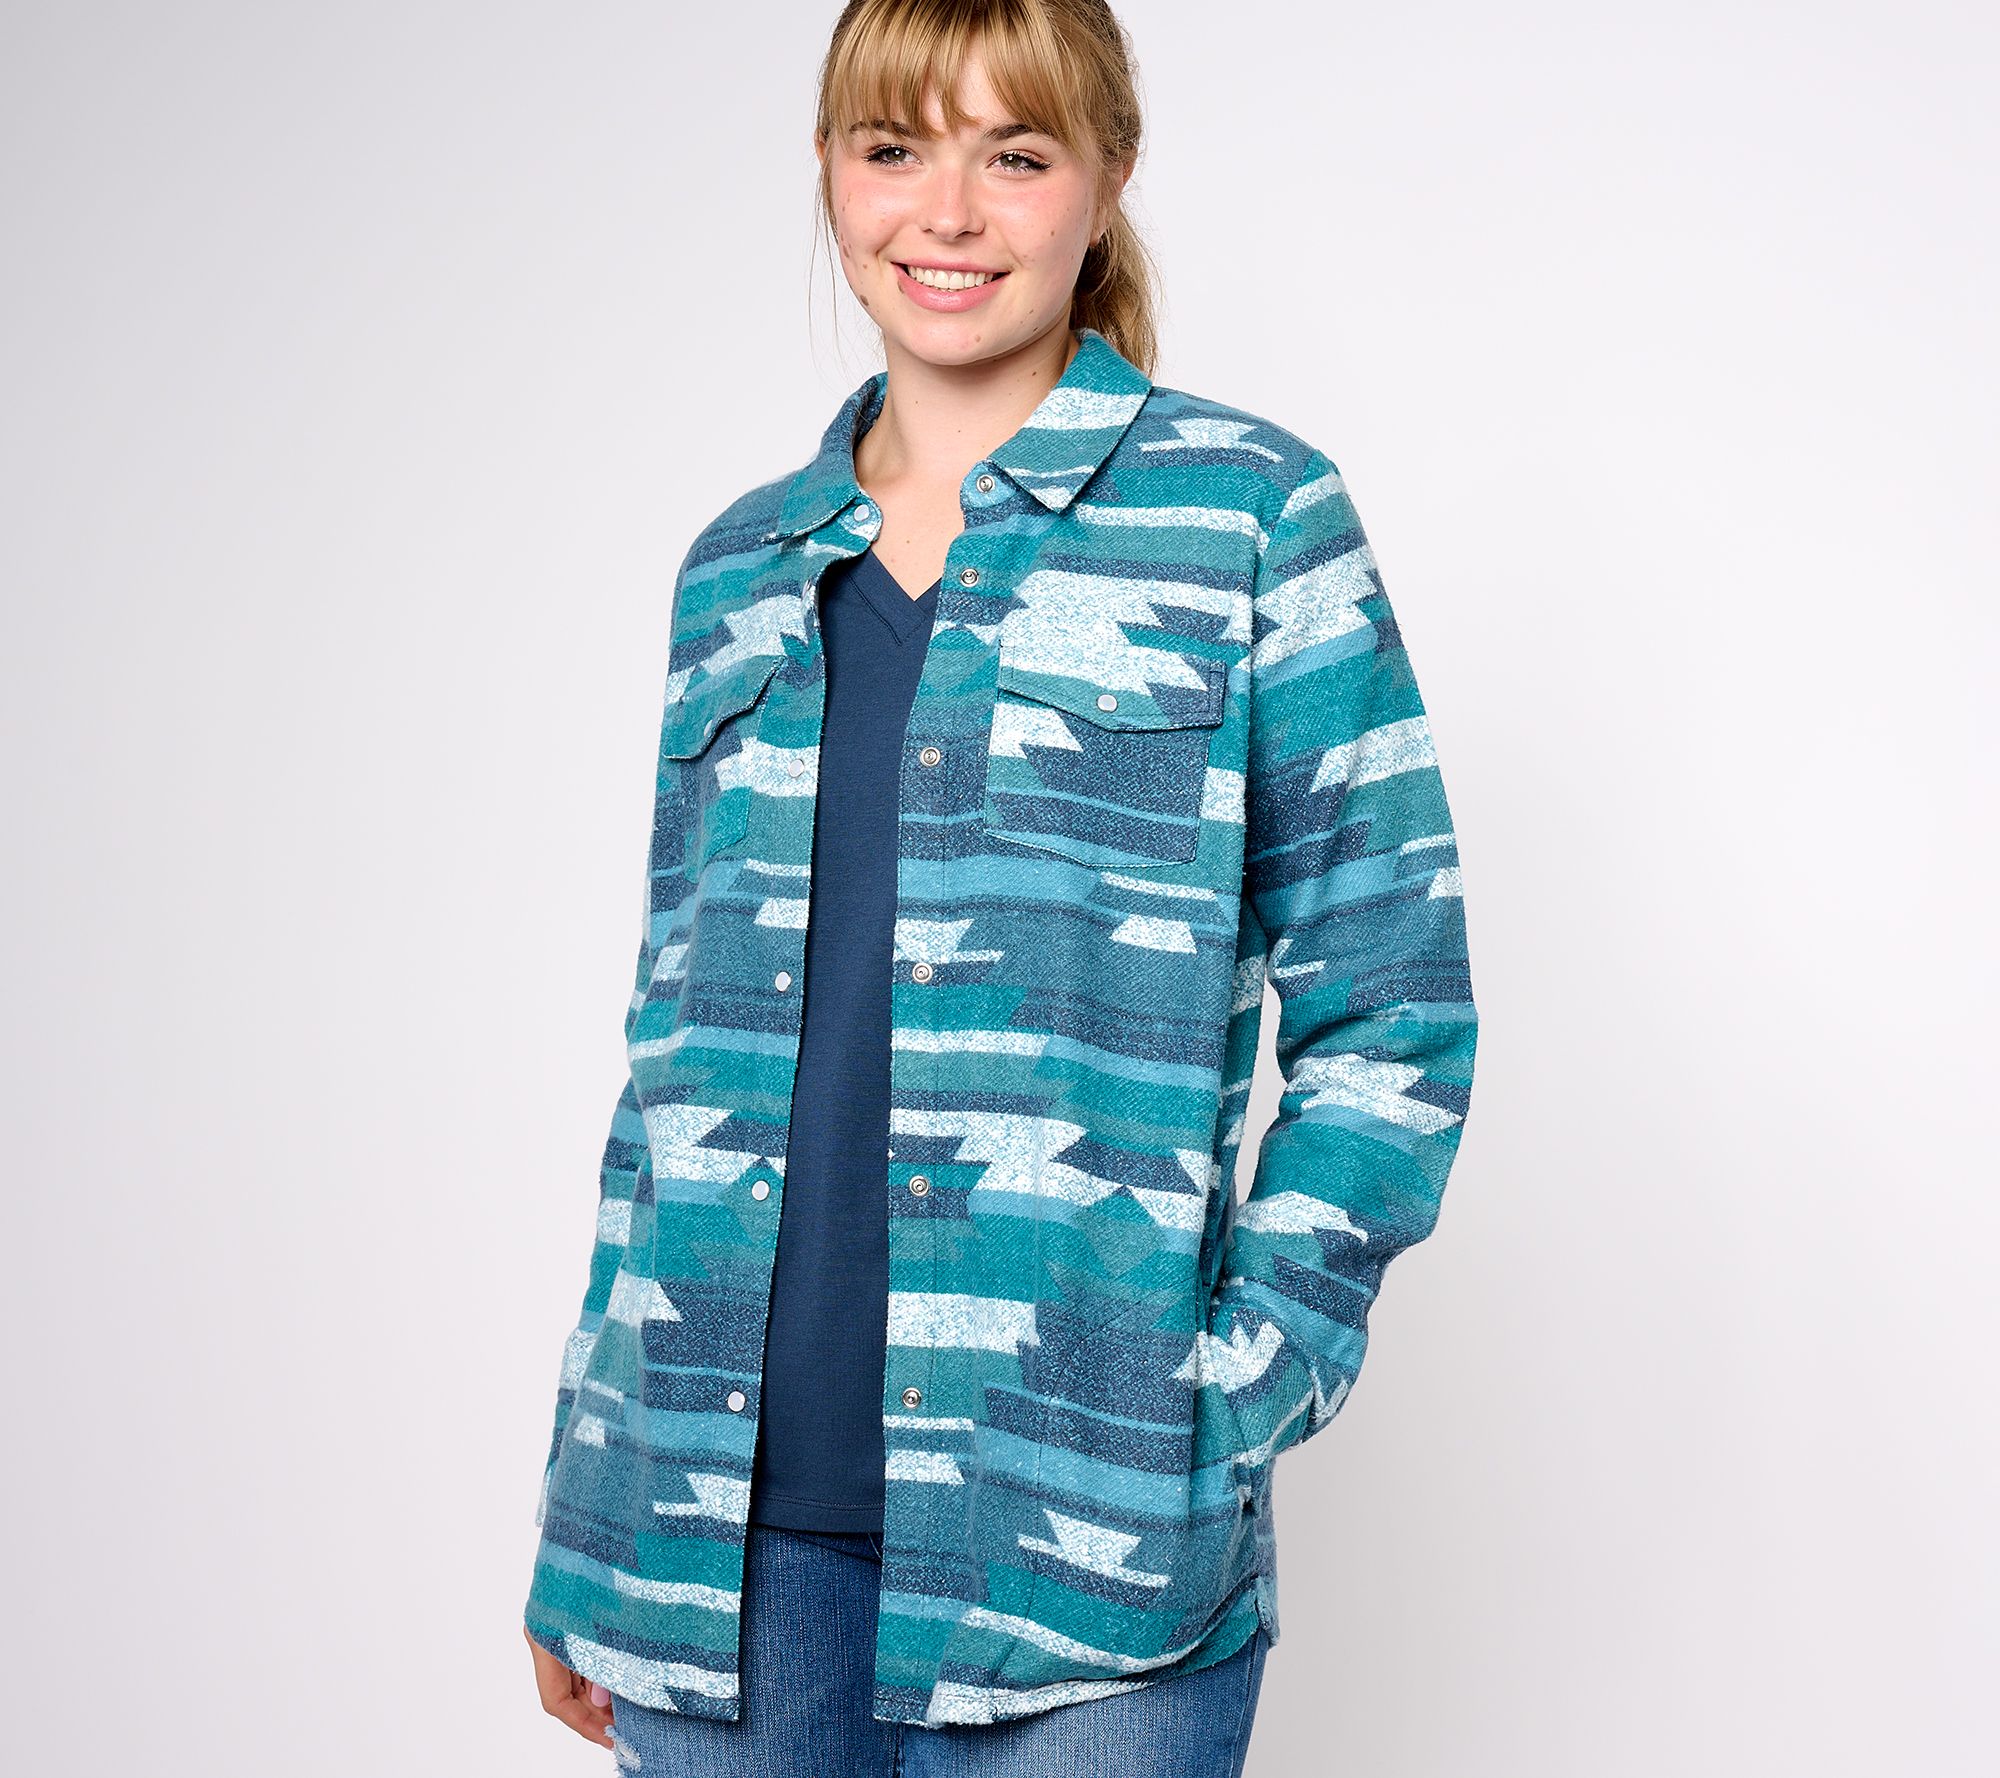 Style & Co Petite Cotton Camouflage Denim Jacket, Created for